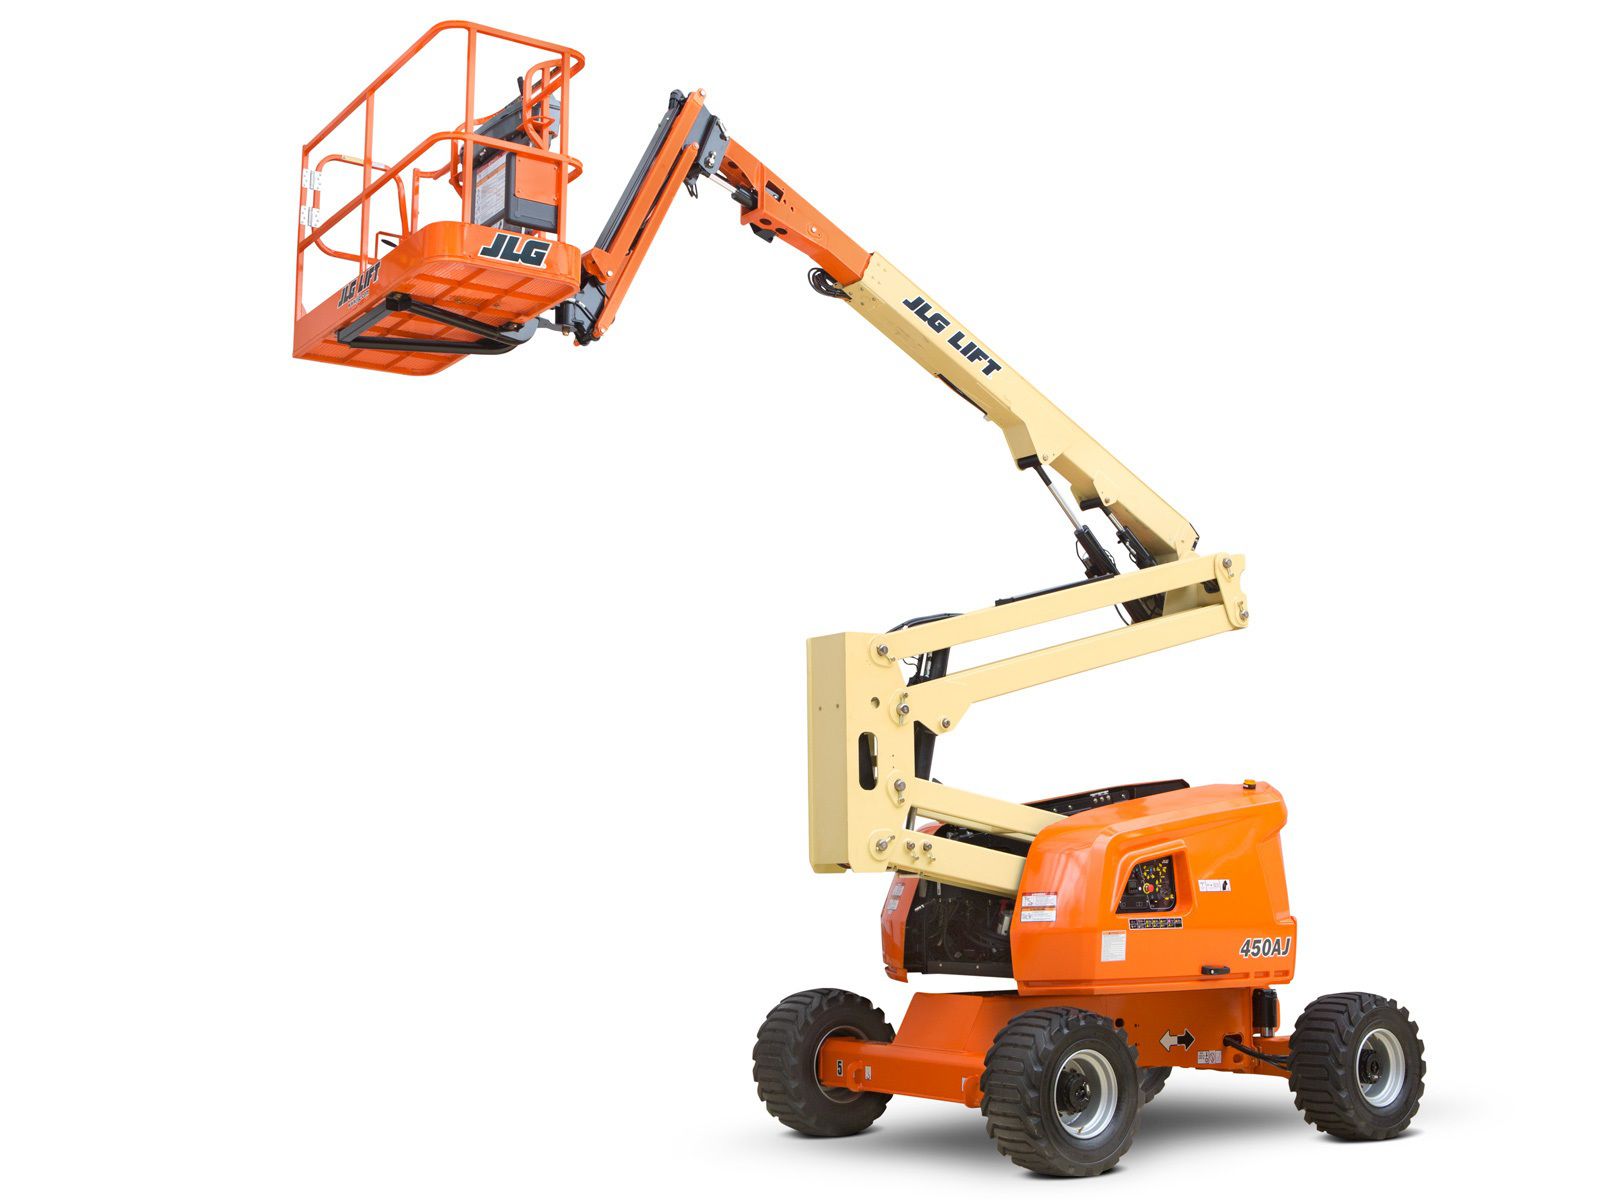 450 AJ articulated boom lift on white background